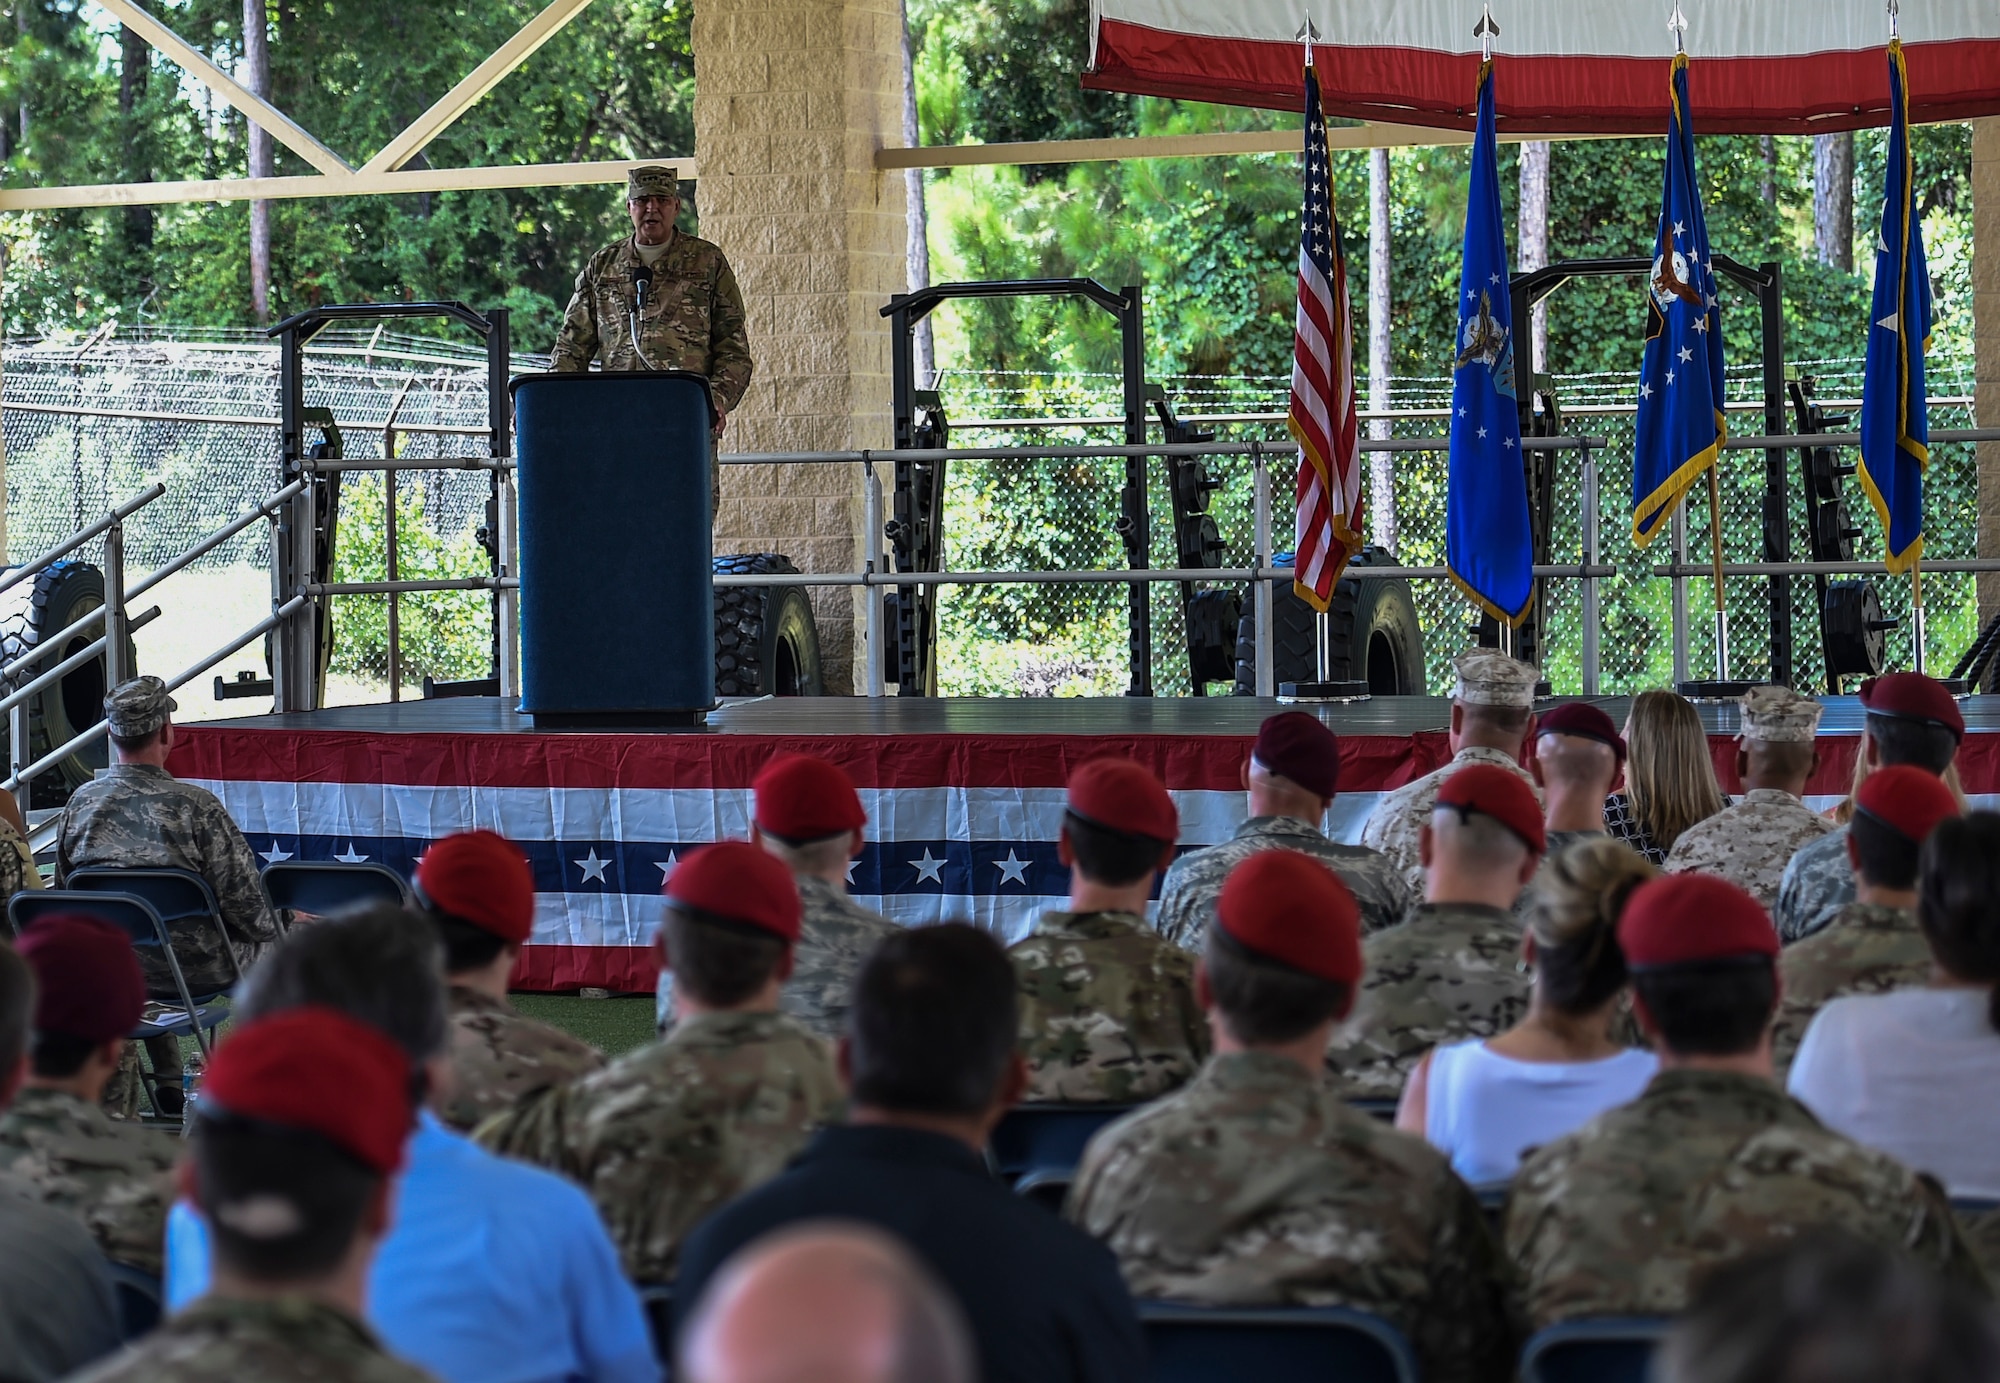 Lt. Gen. Brad Heithold, commander of the Air Force Special Operations Command, speaks during the 24th Special Operations Wing assumption of command at Hurlburt Field, Fla., July 14, 2016. Heithold presided over the assumption of command, where Col. Michael Martin took command of the sole Special Tactics wing in the Air Force. (U.S. Air Force photo by Senior Airman Ryan Conroy)